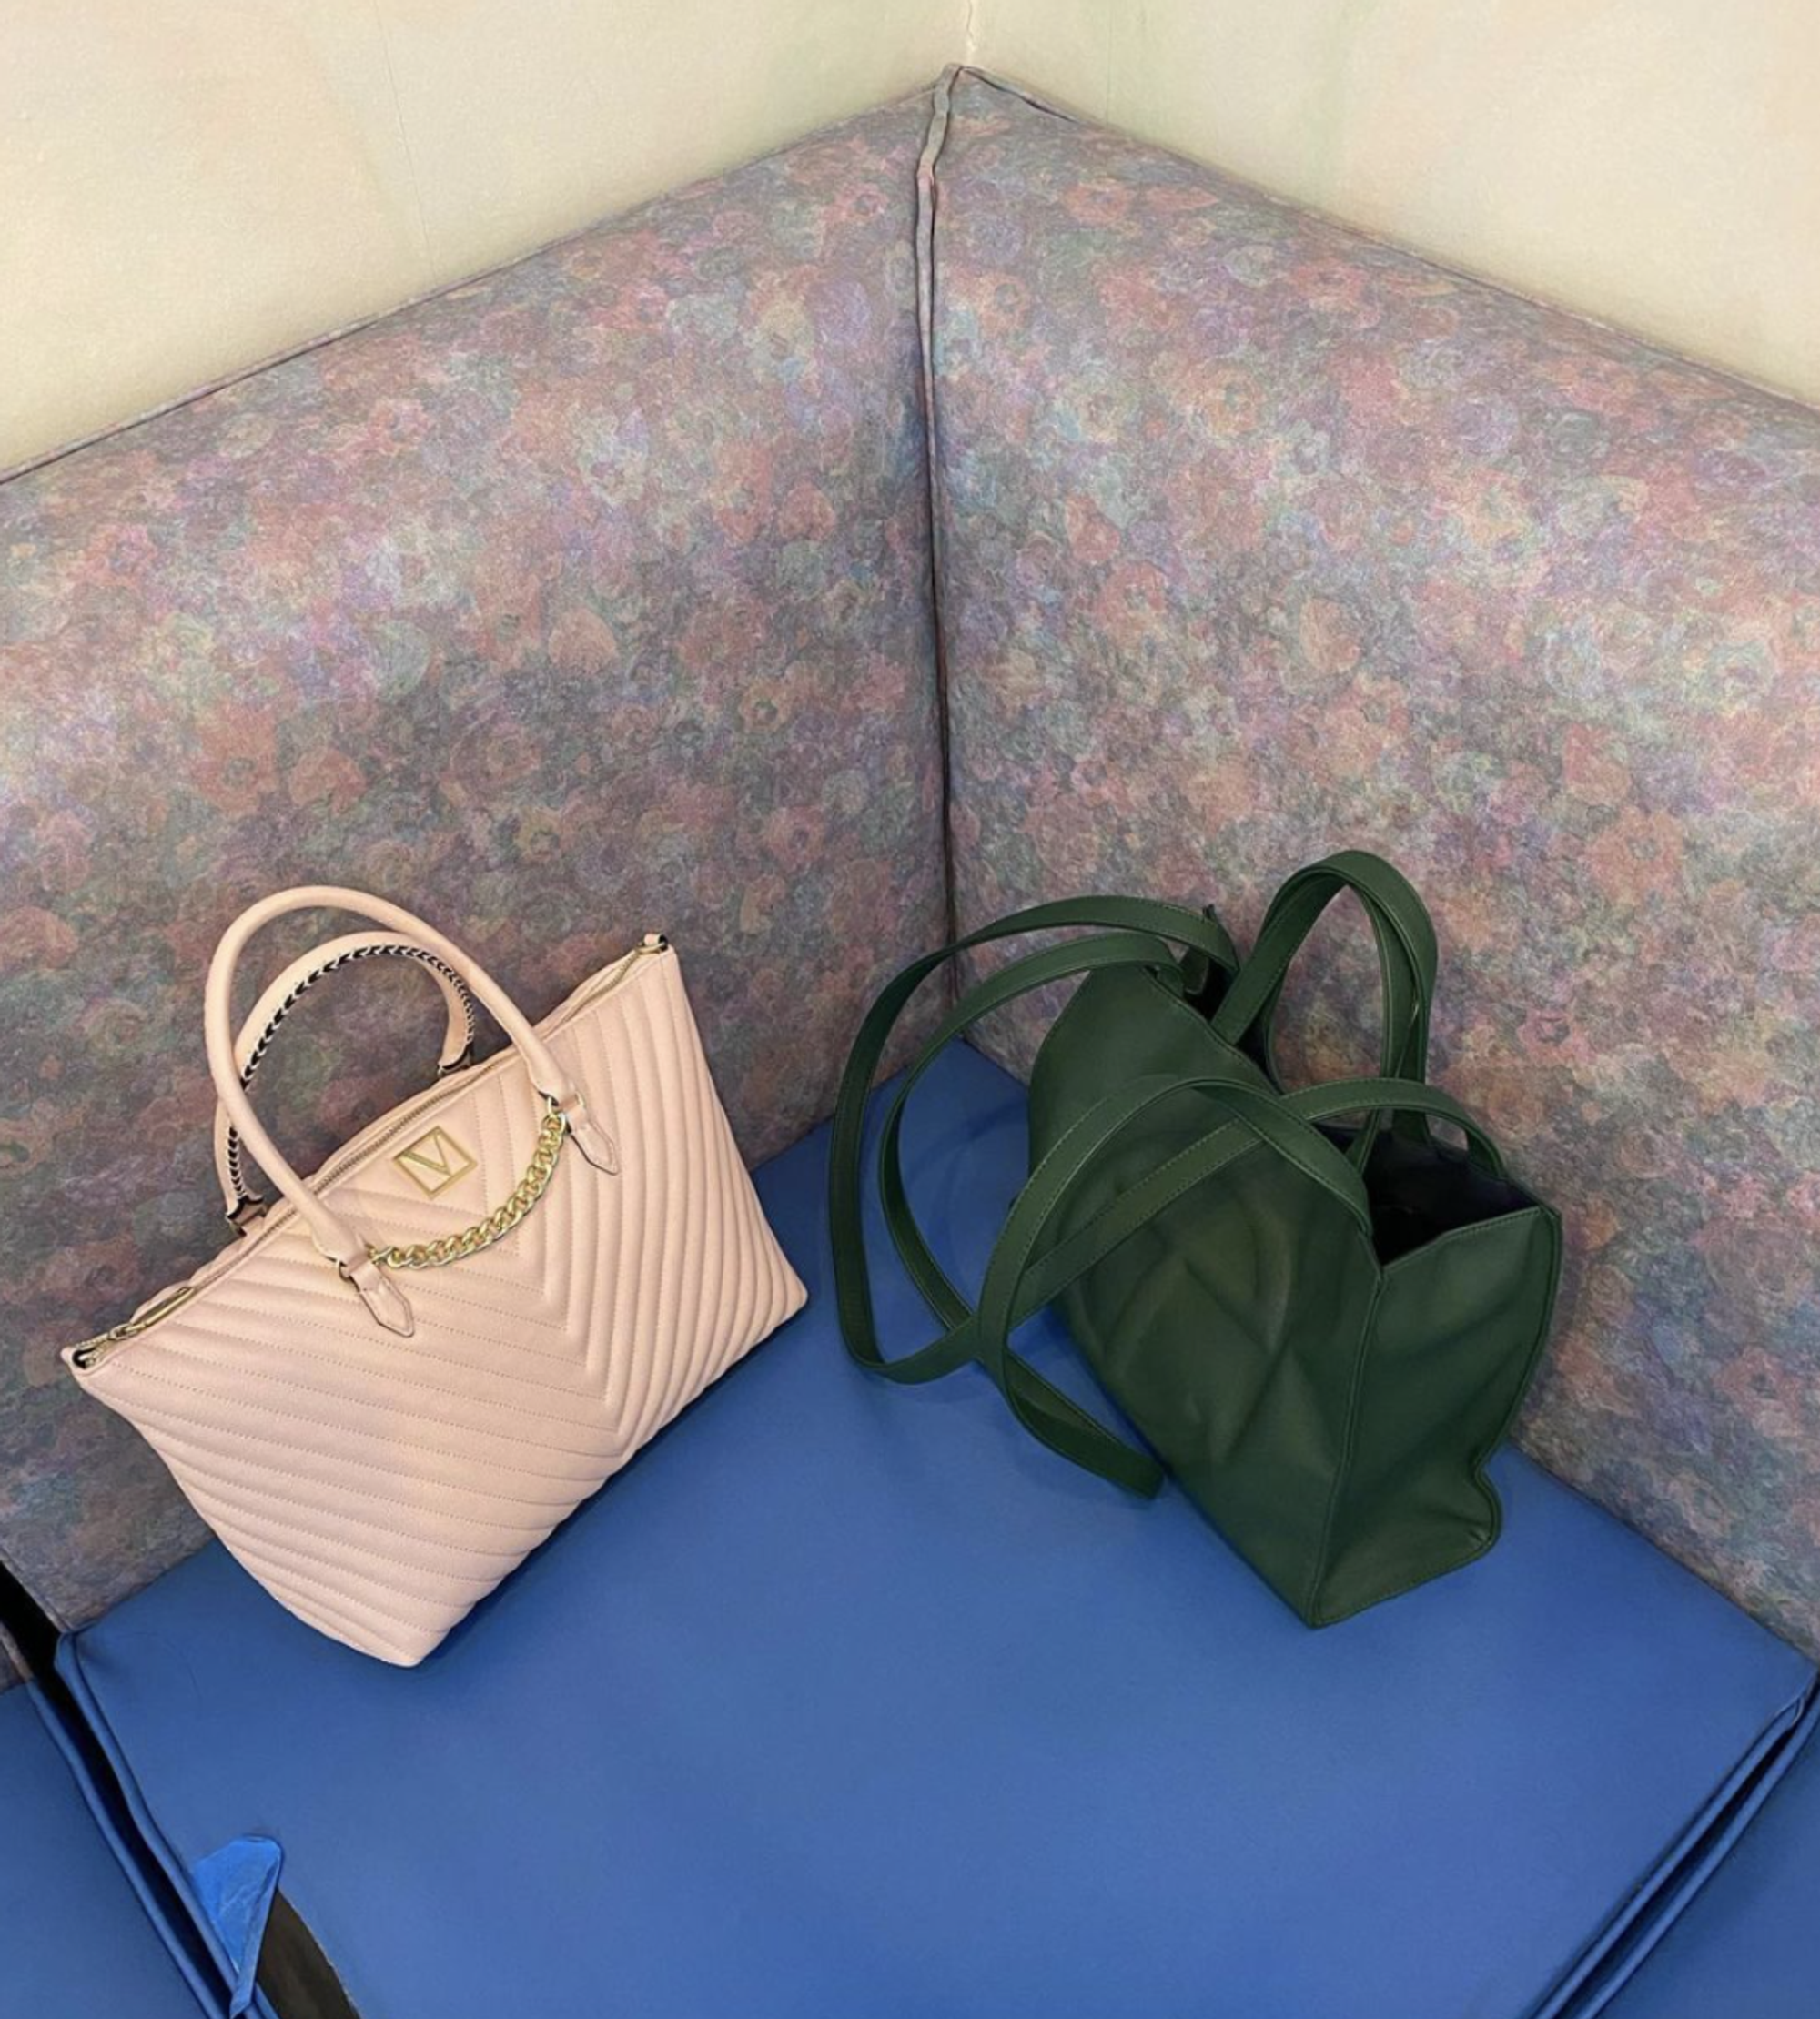 Two bags—one pastel pink purse, and a dark green Telfar tote, lean against a speckled plastic couch.